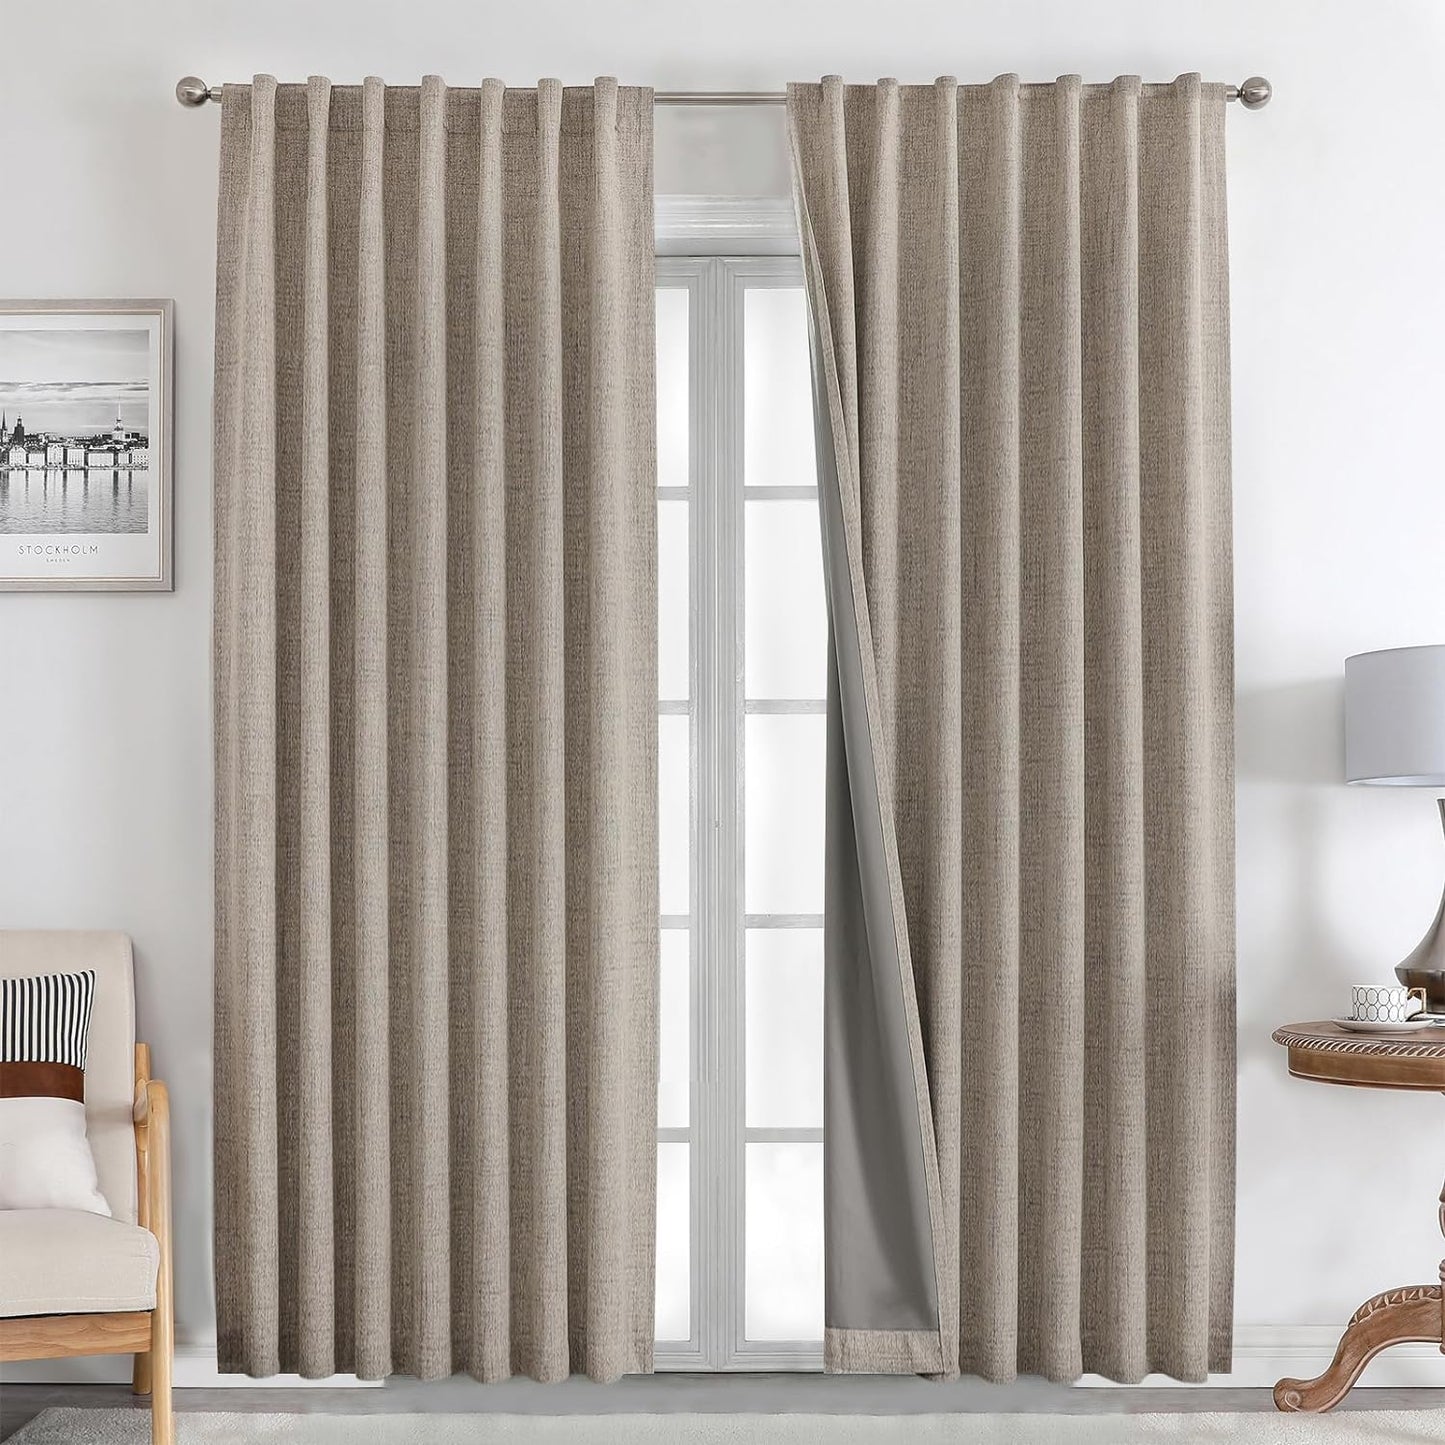 Joydeco Blackout Linen Curtains 96 Inches Long 100% Blackout Drapes 95 Inch Length 2 Panels Set for Bedroom Living Room Darkening Curtain Thermal Insulated Backtab Rodpocket(52X96Inch Linen)  Joydeco Linen 52W X 84L Inch X 2 Panels 